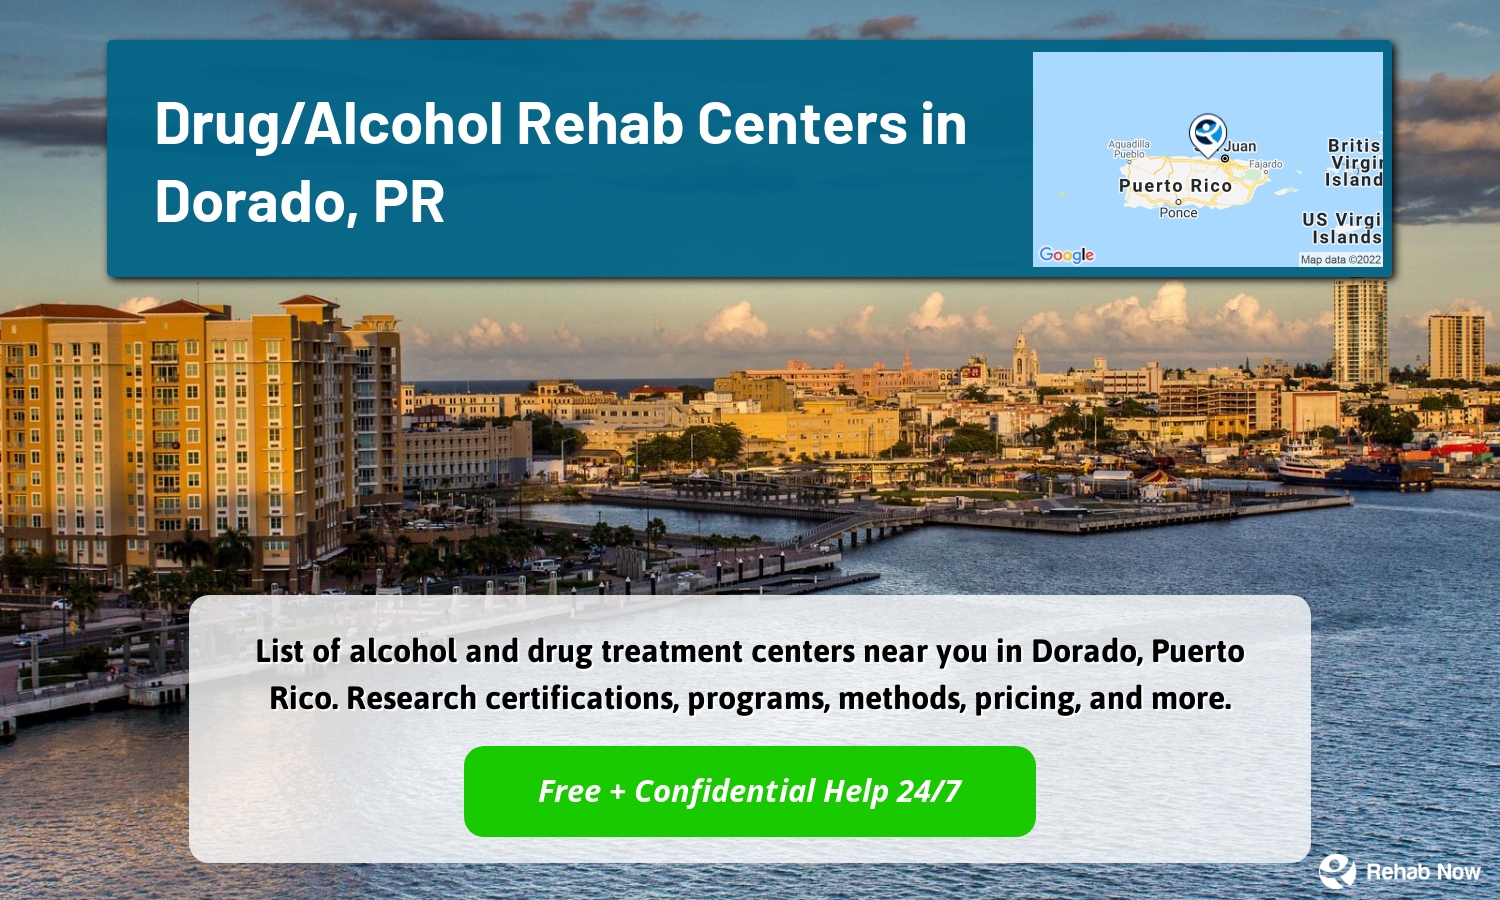 List of alcohol and drug treatment centers near you in Dorado, Puerto Rico. Research certifications, programs, methods, pricing, and more.